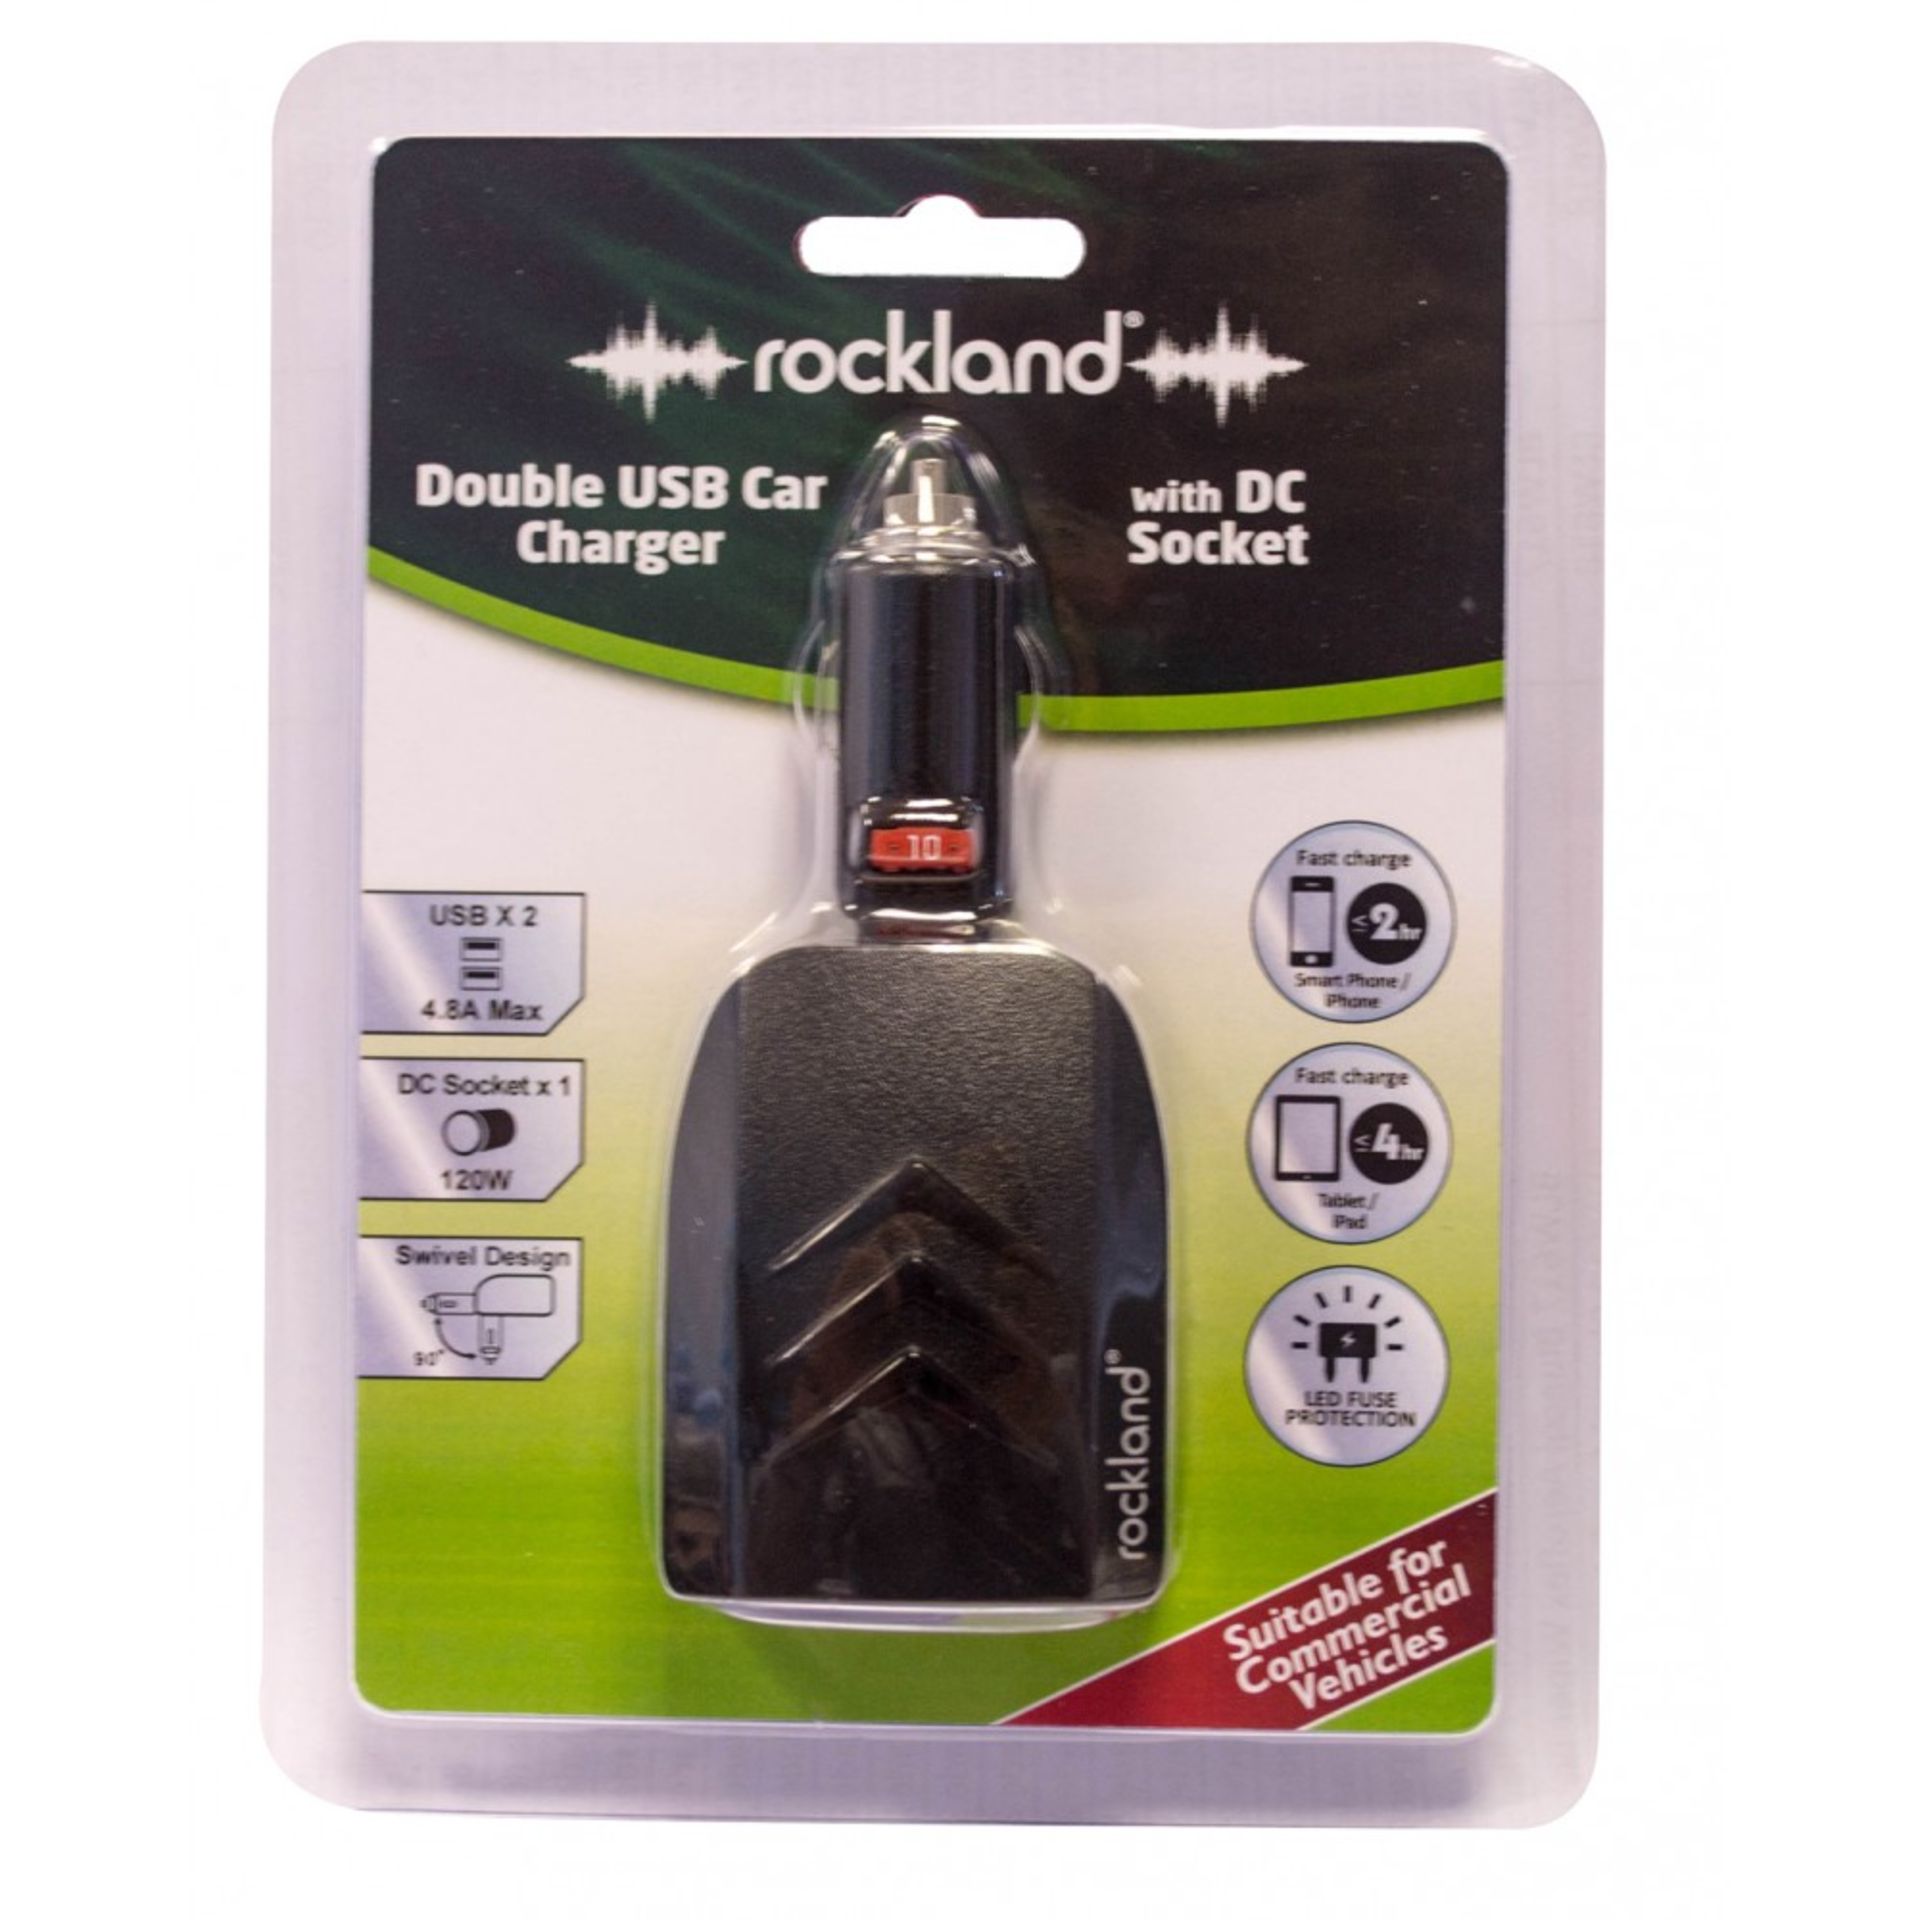 64 X Rockland Rdc003 Double Usb Car Charger With Dc Socket Rrp 2.99 Ea